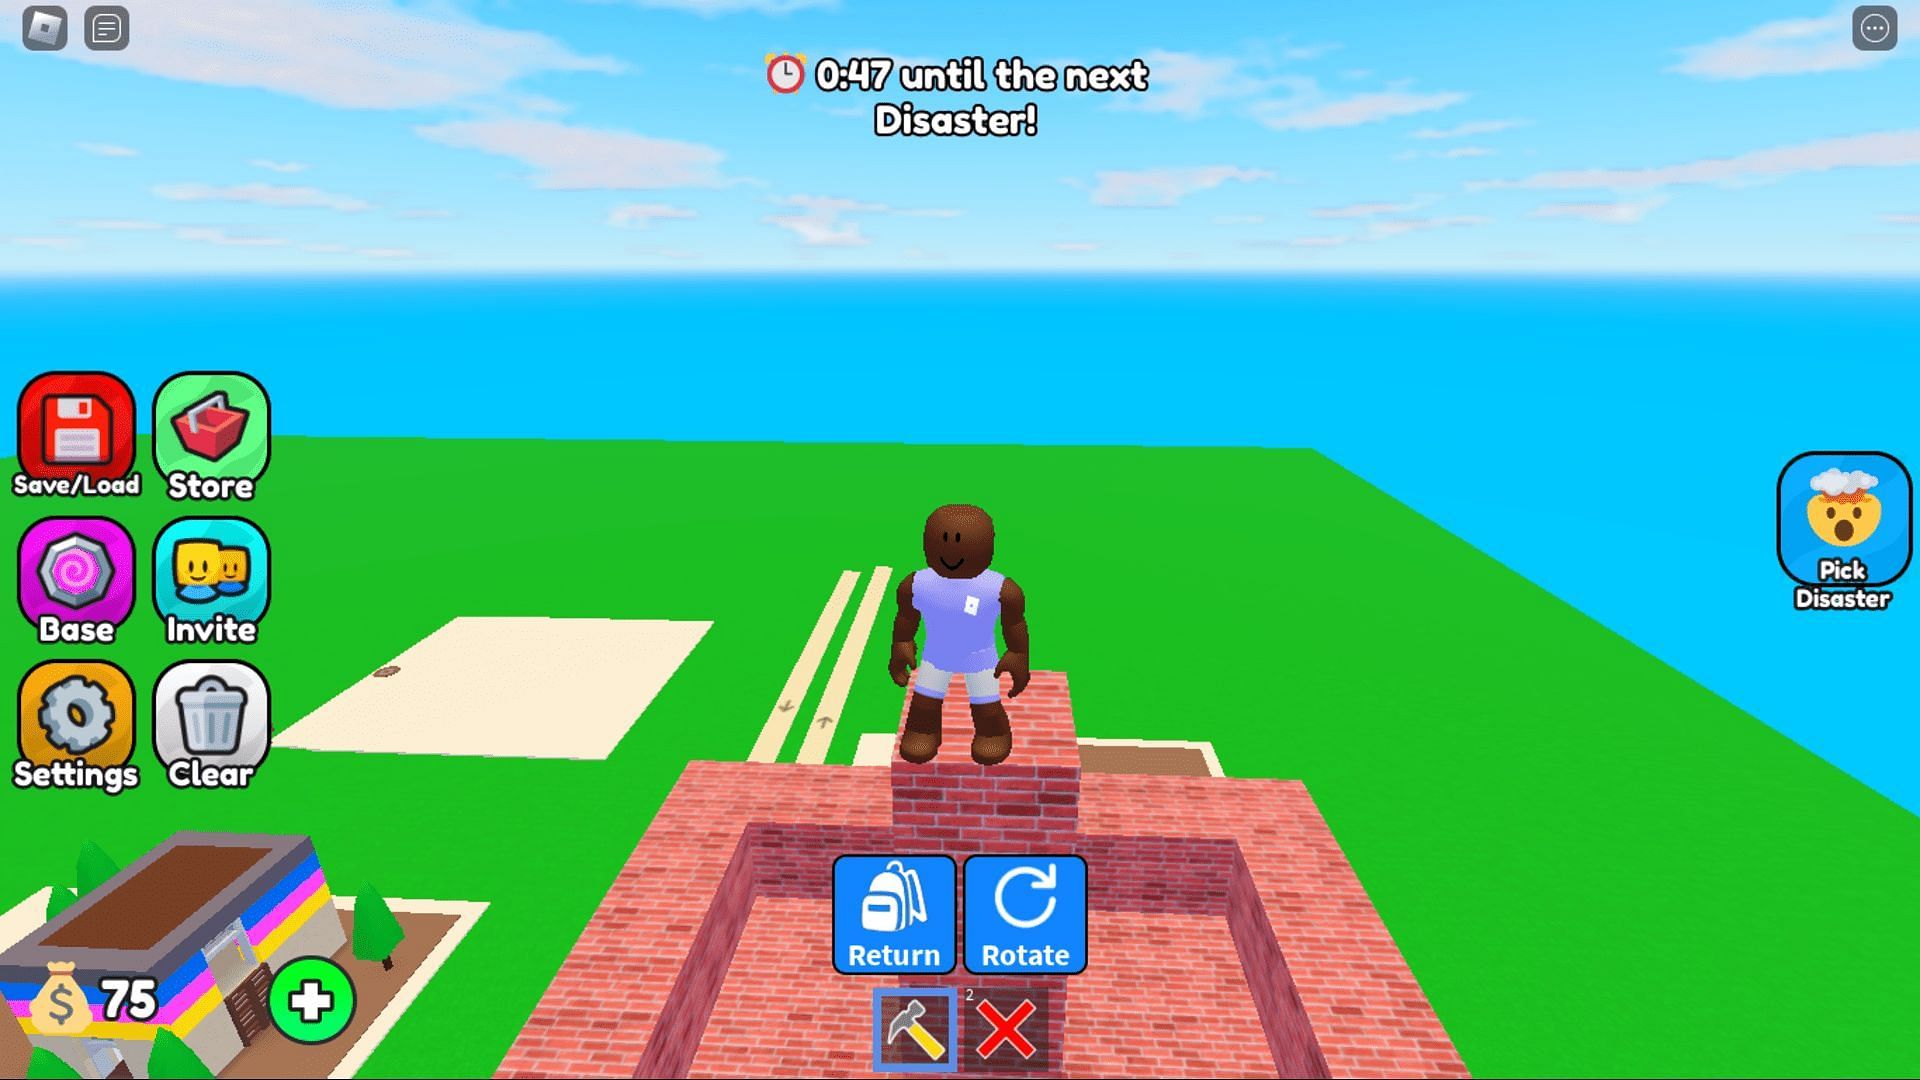 Gameplay screenshot from Build to Survive the Disasters (Image via Roblox)